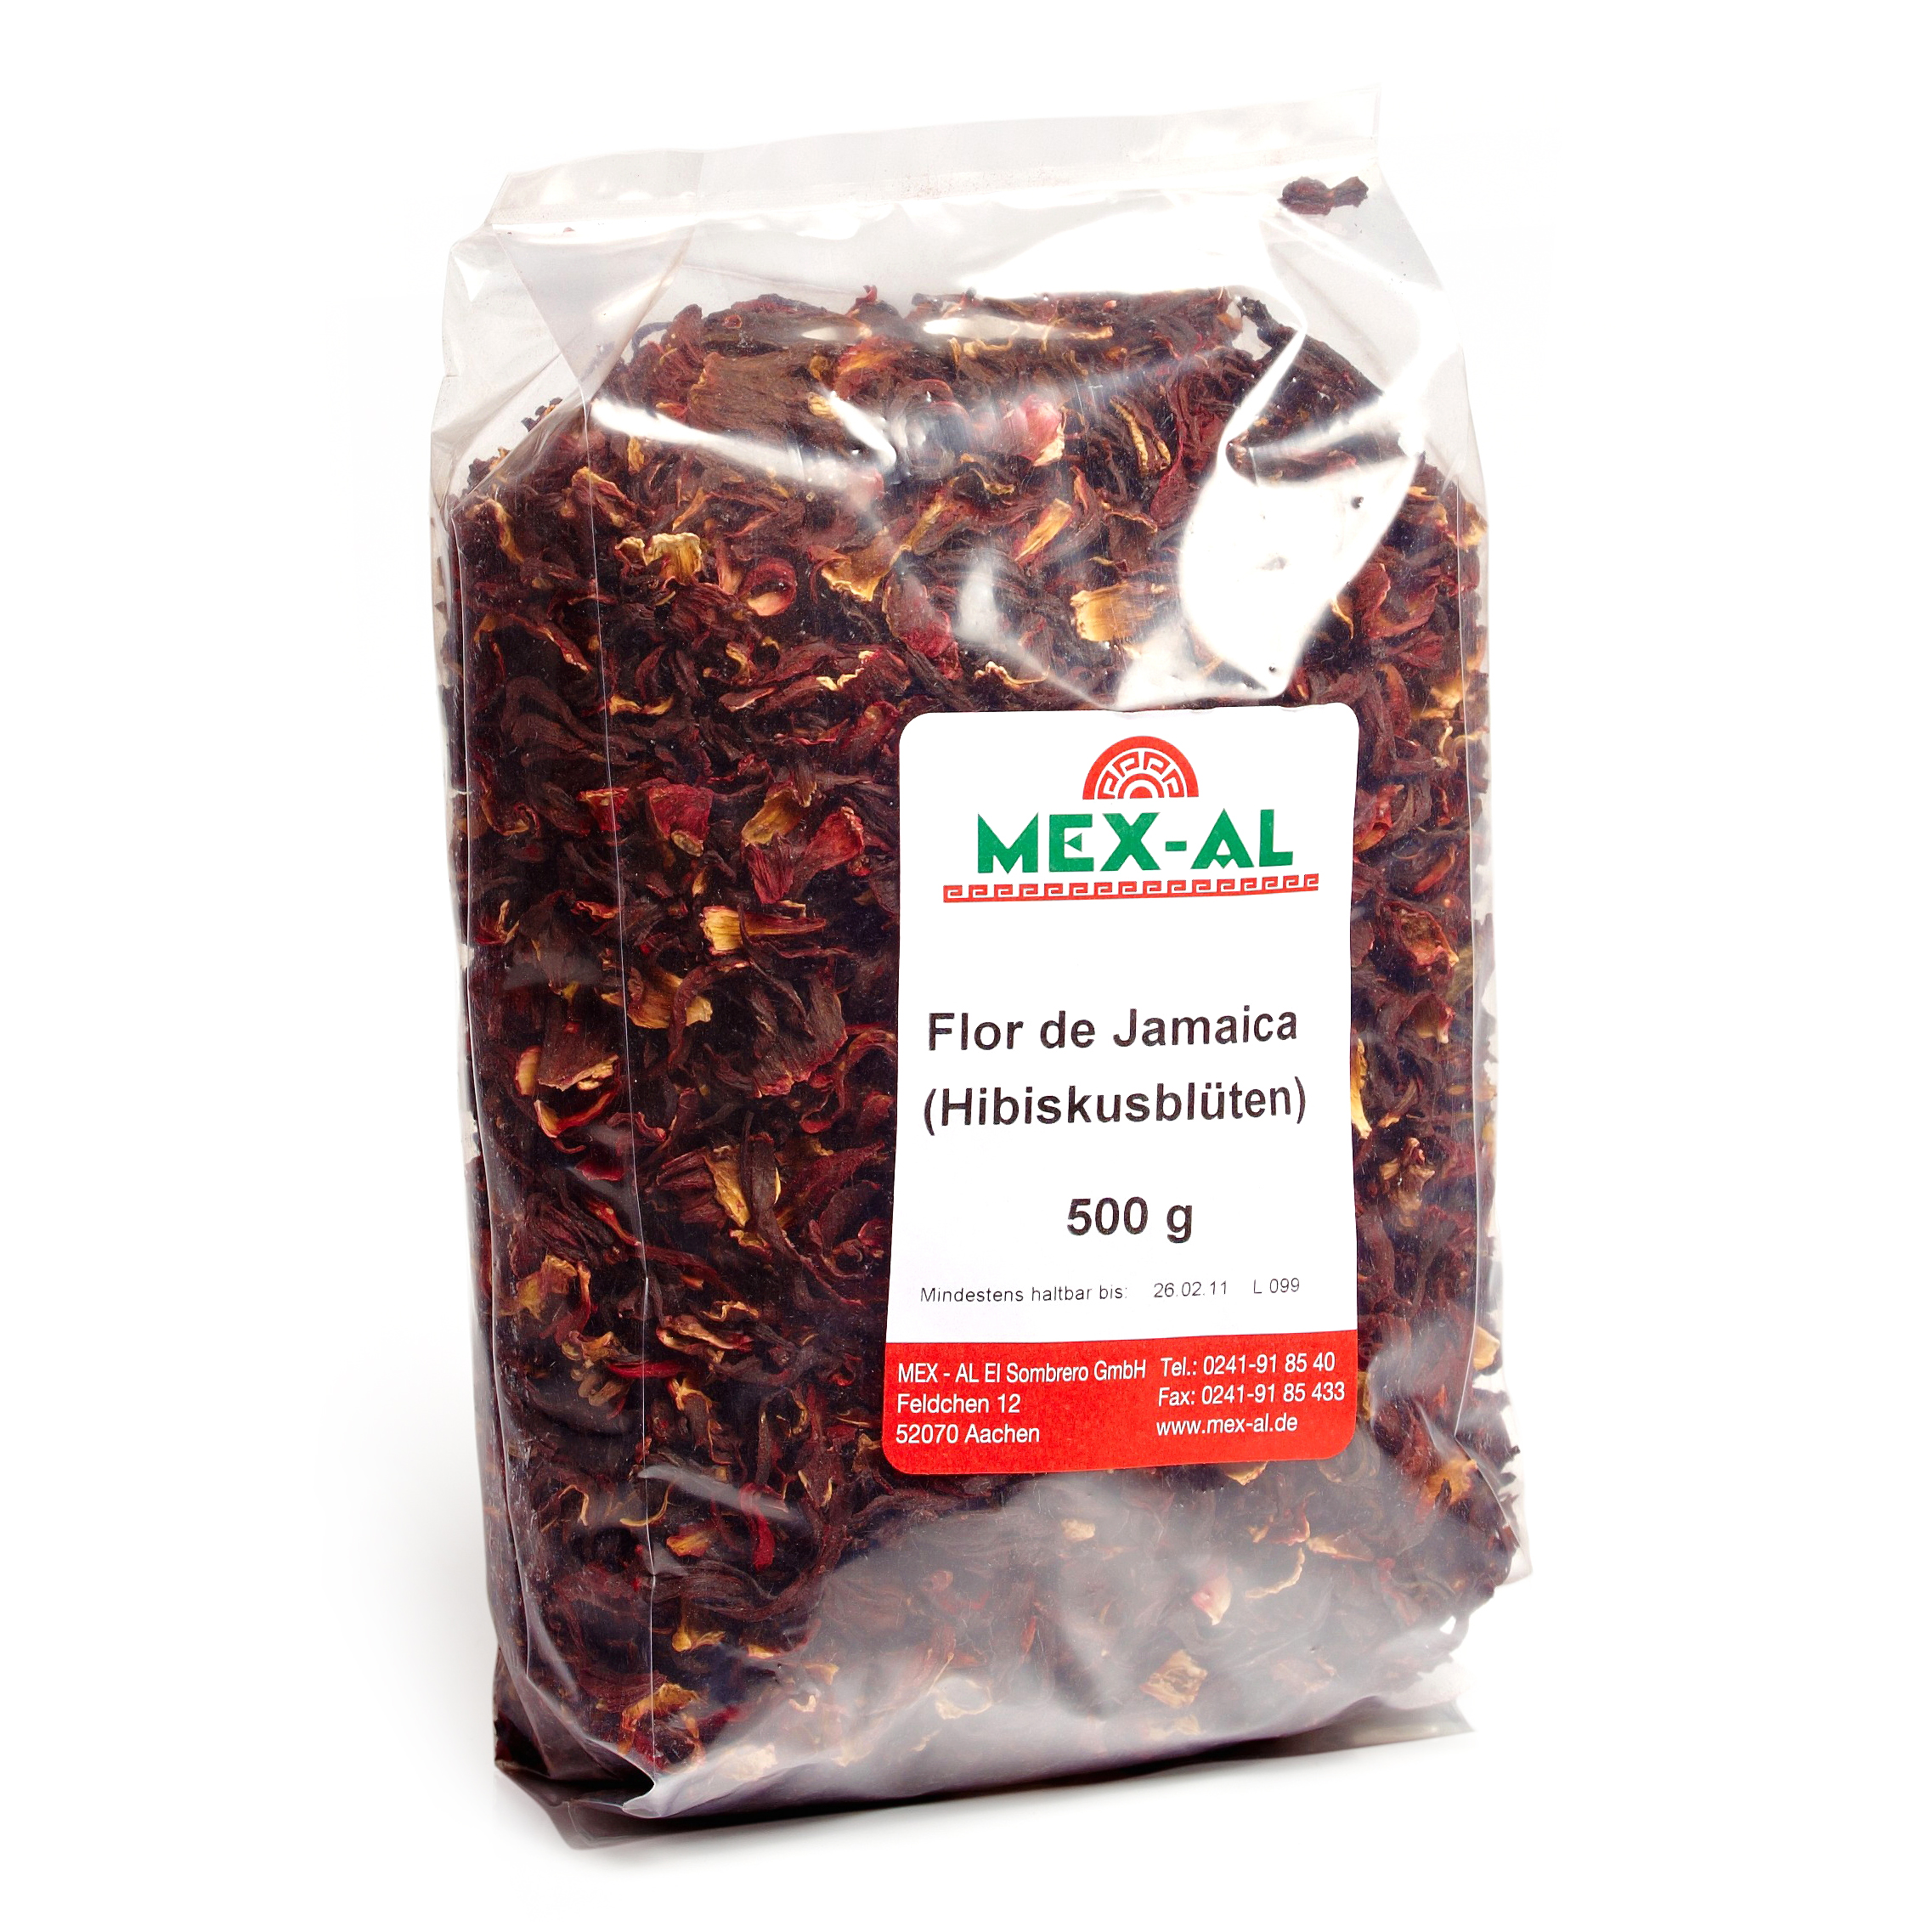 FLOR DE JAMAICA hibiscus flower dry 500g bag | Juices | Drinks | Mex-Al  GmbH webshop for Mexican Food and Drinks